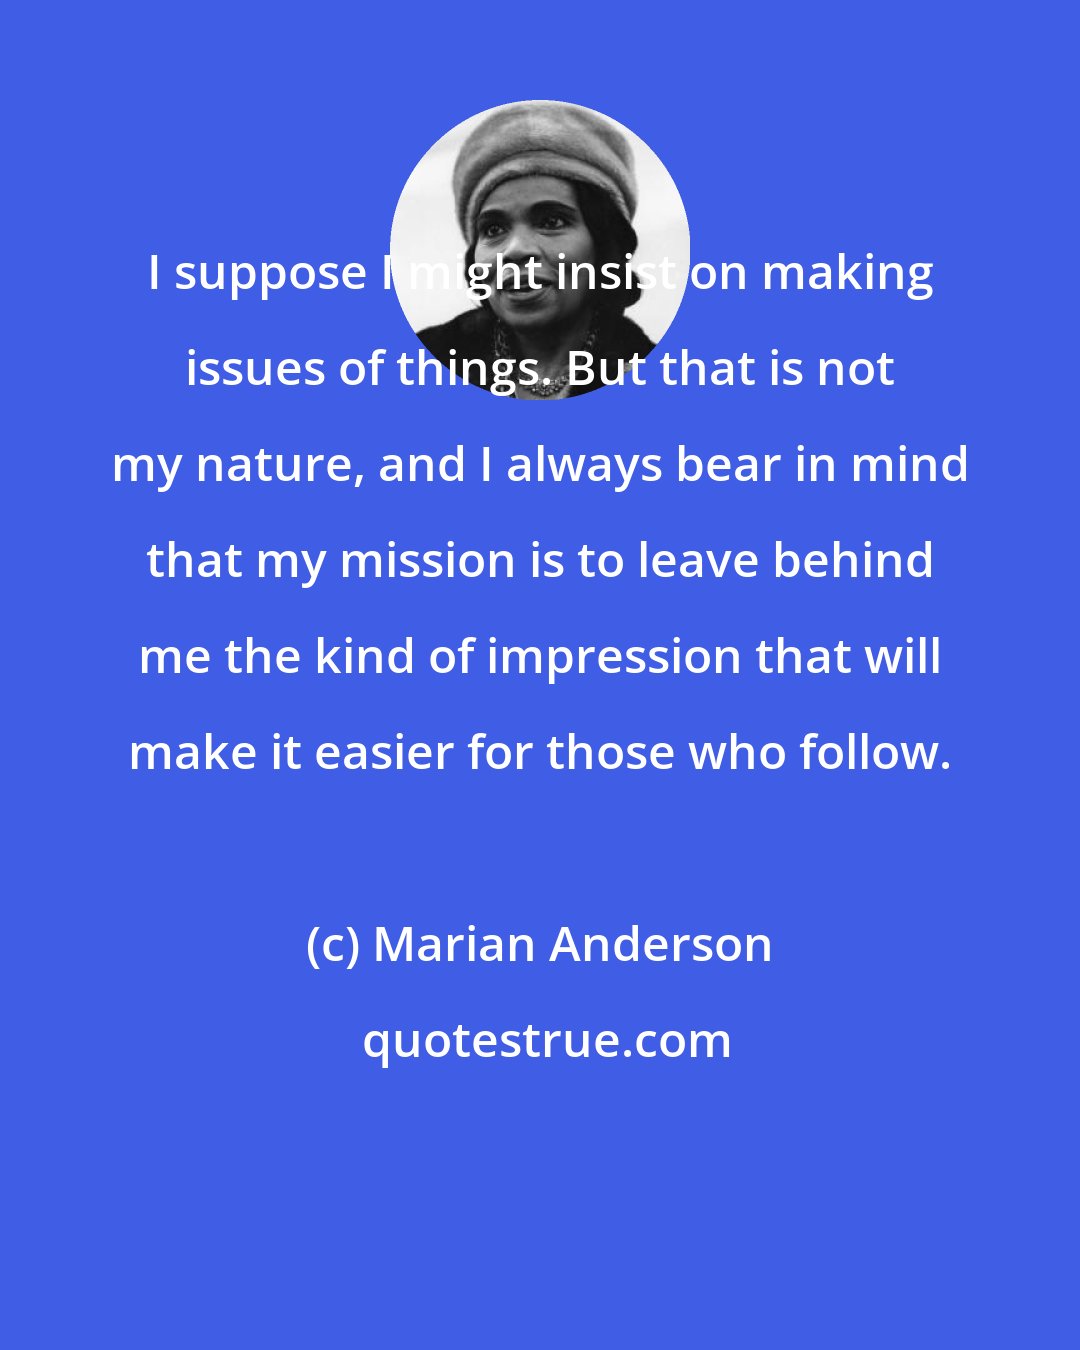 Marian Anderson: I suppose I might insist on making issues of things. But that is not my nature, and I always bear in mind that my mission is to leave behind me the kind of impression that will make it easier for those who follow.